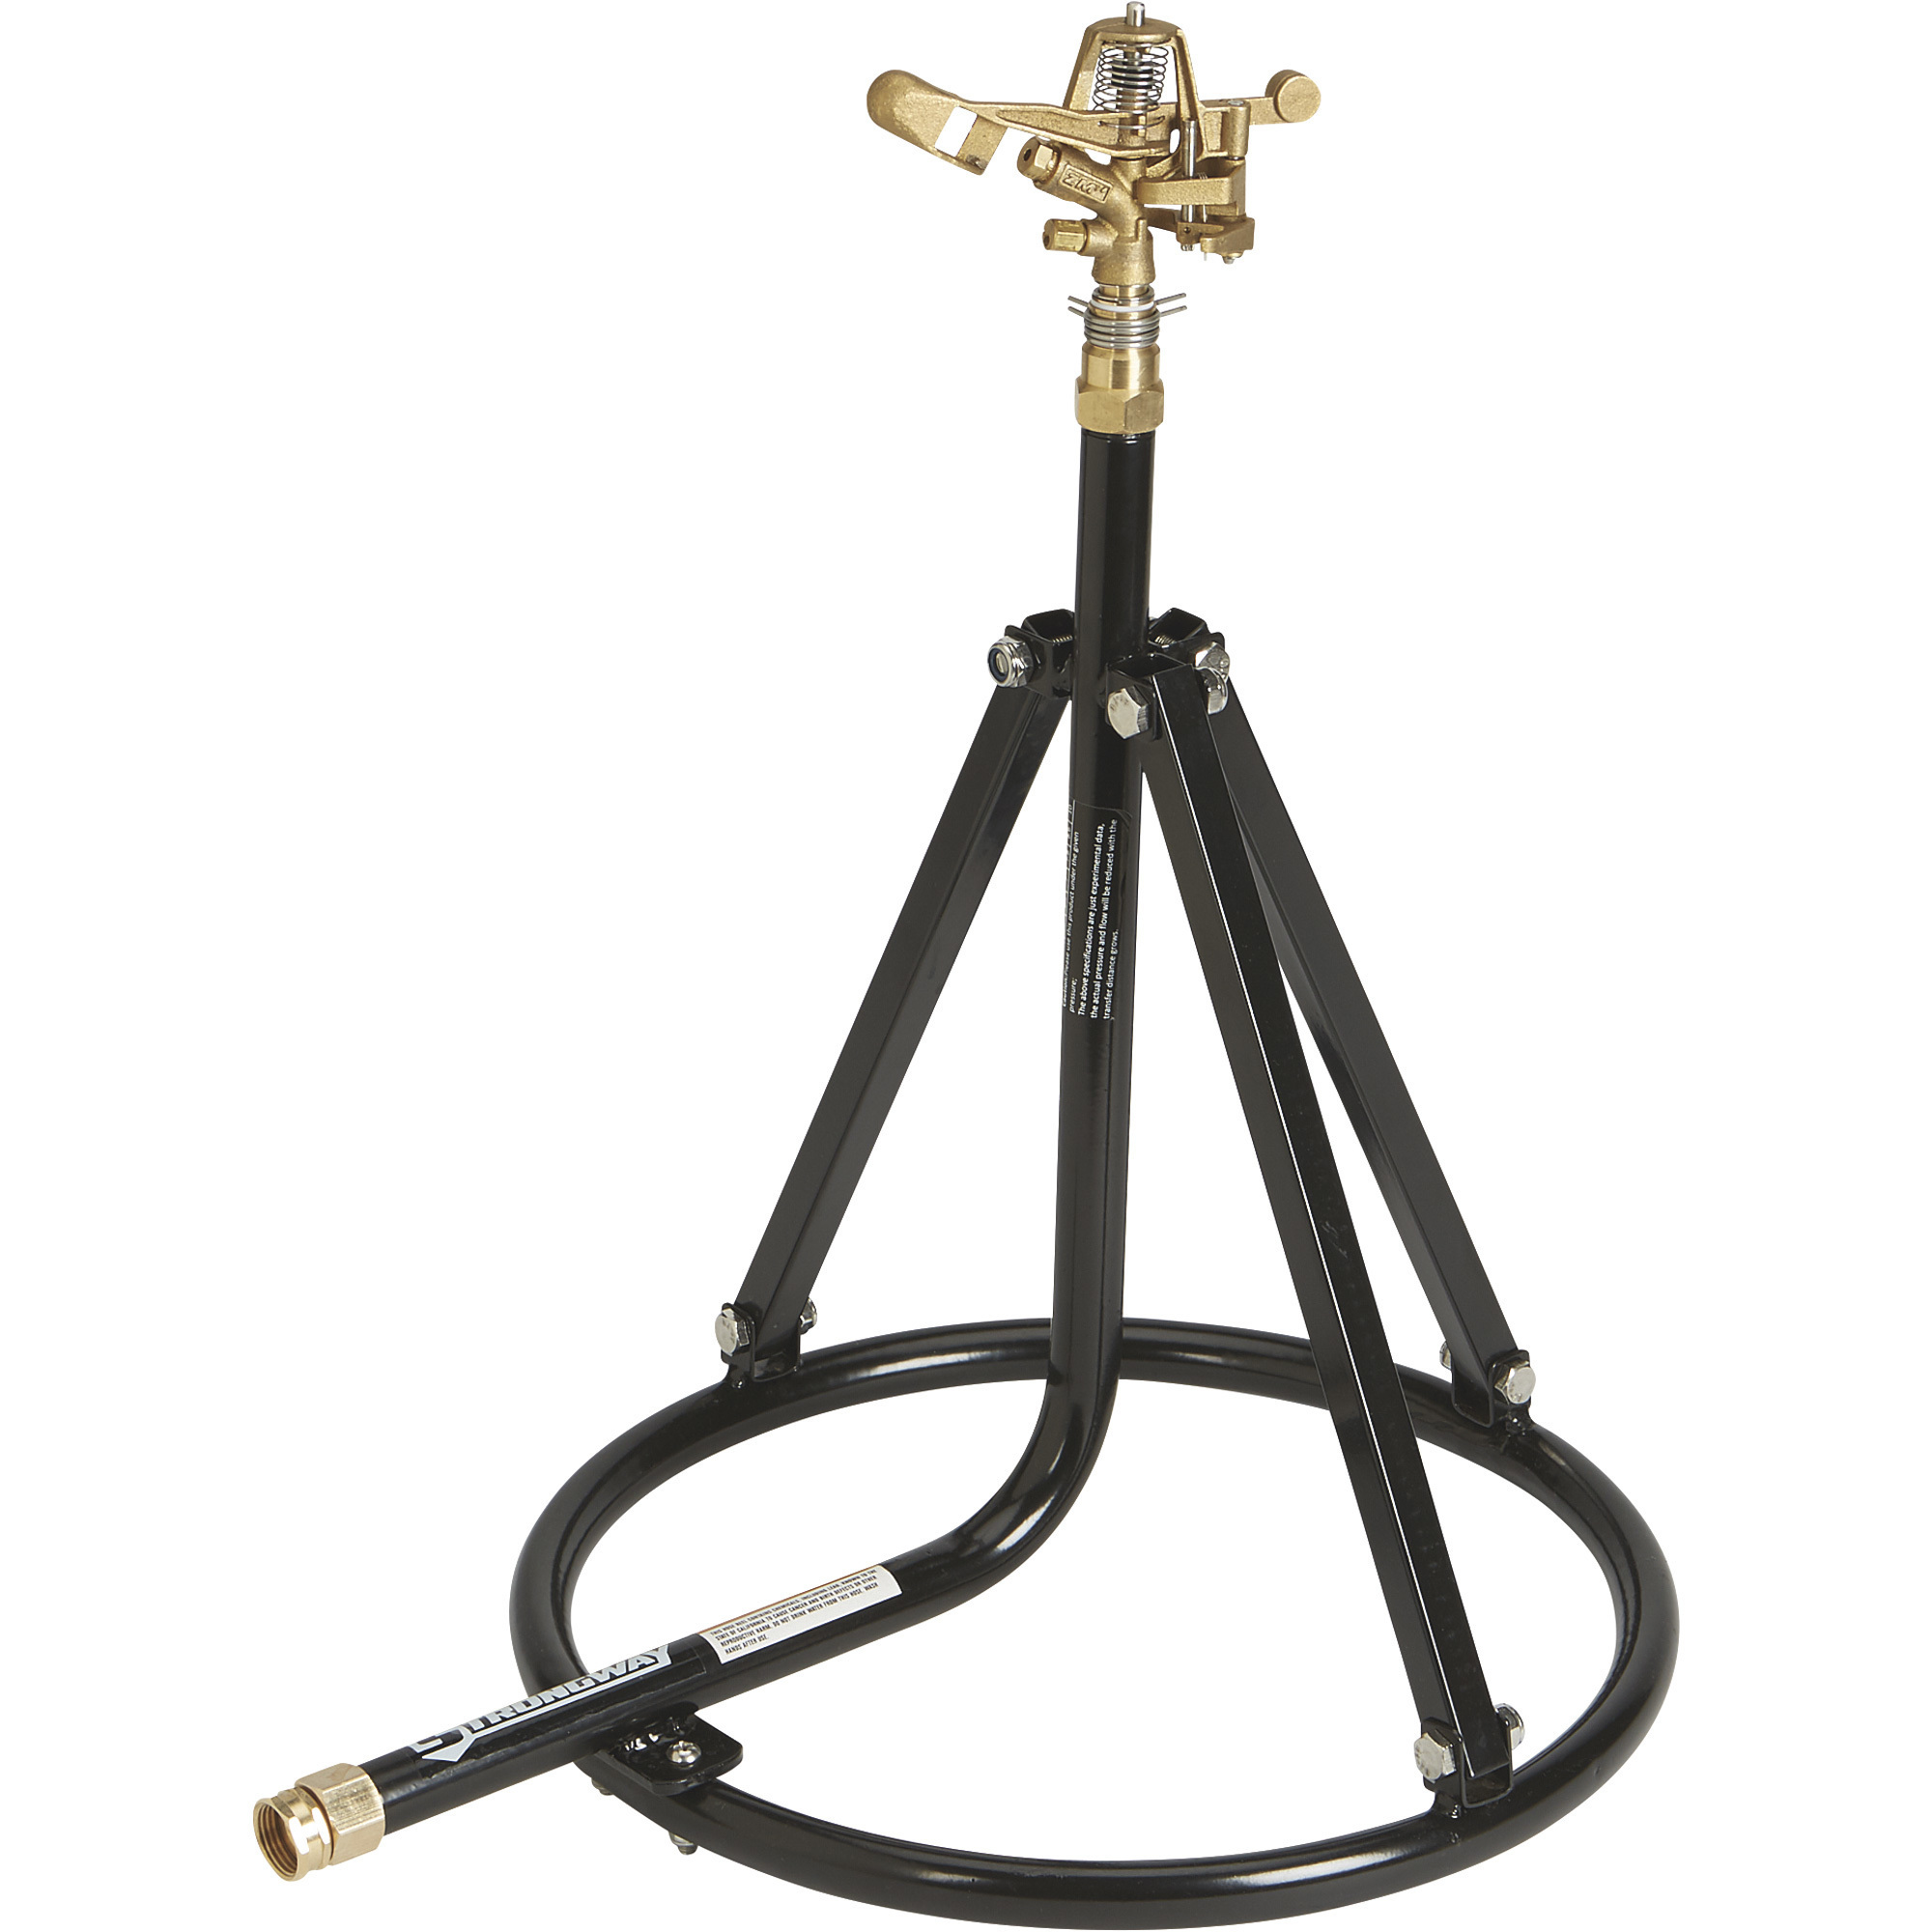 Strongway Tripod Sprinkler with Round Base, 3/4Inch Brass Head with 2 Nozzles, 100ft. Diameter Coverage